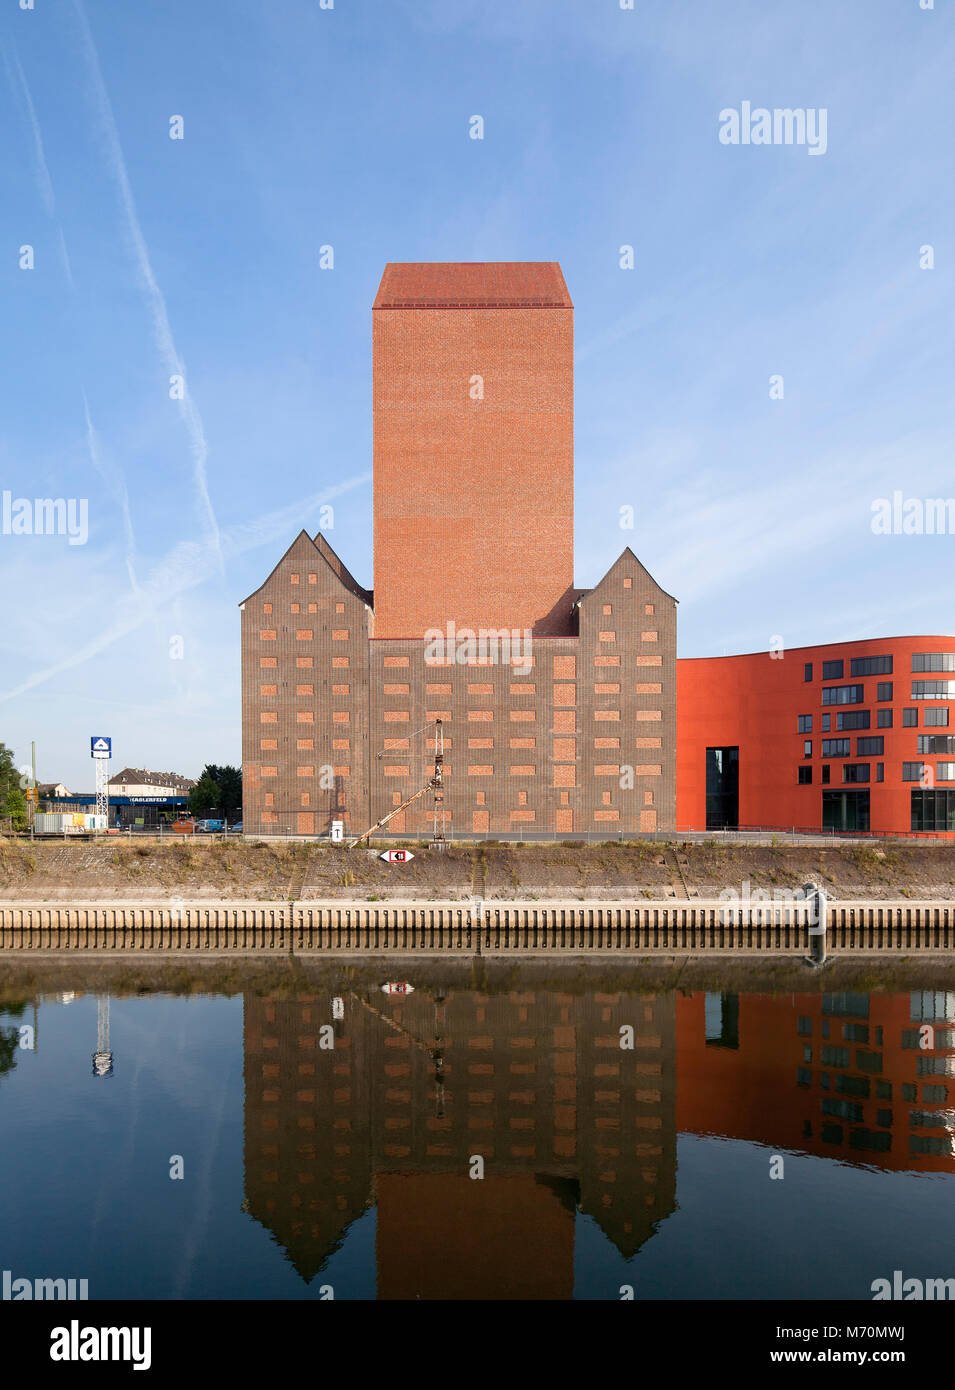 State archive of North Rhine-Westphalia (NRW) in Duisburg, Germany Stock Photo